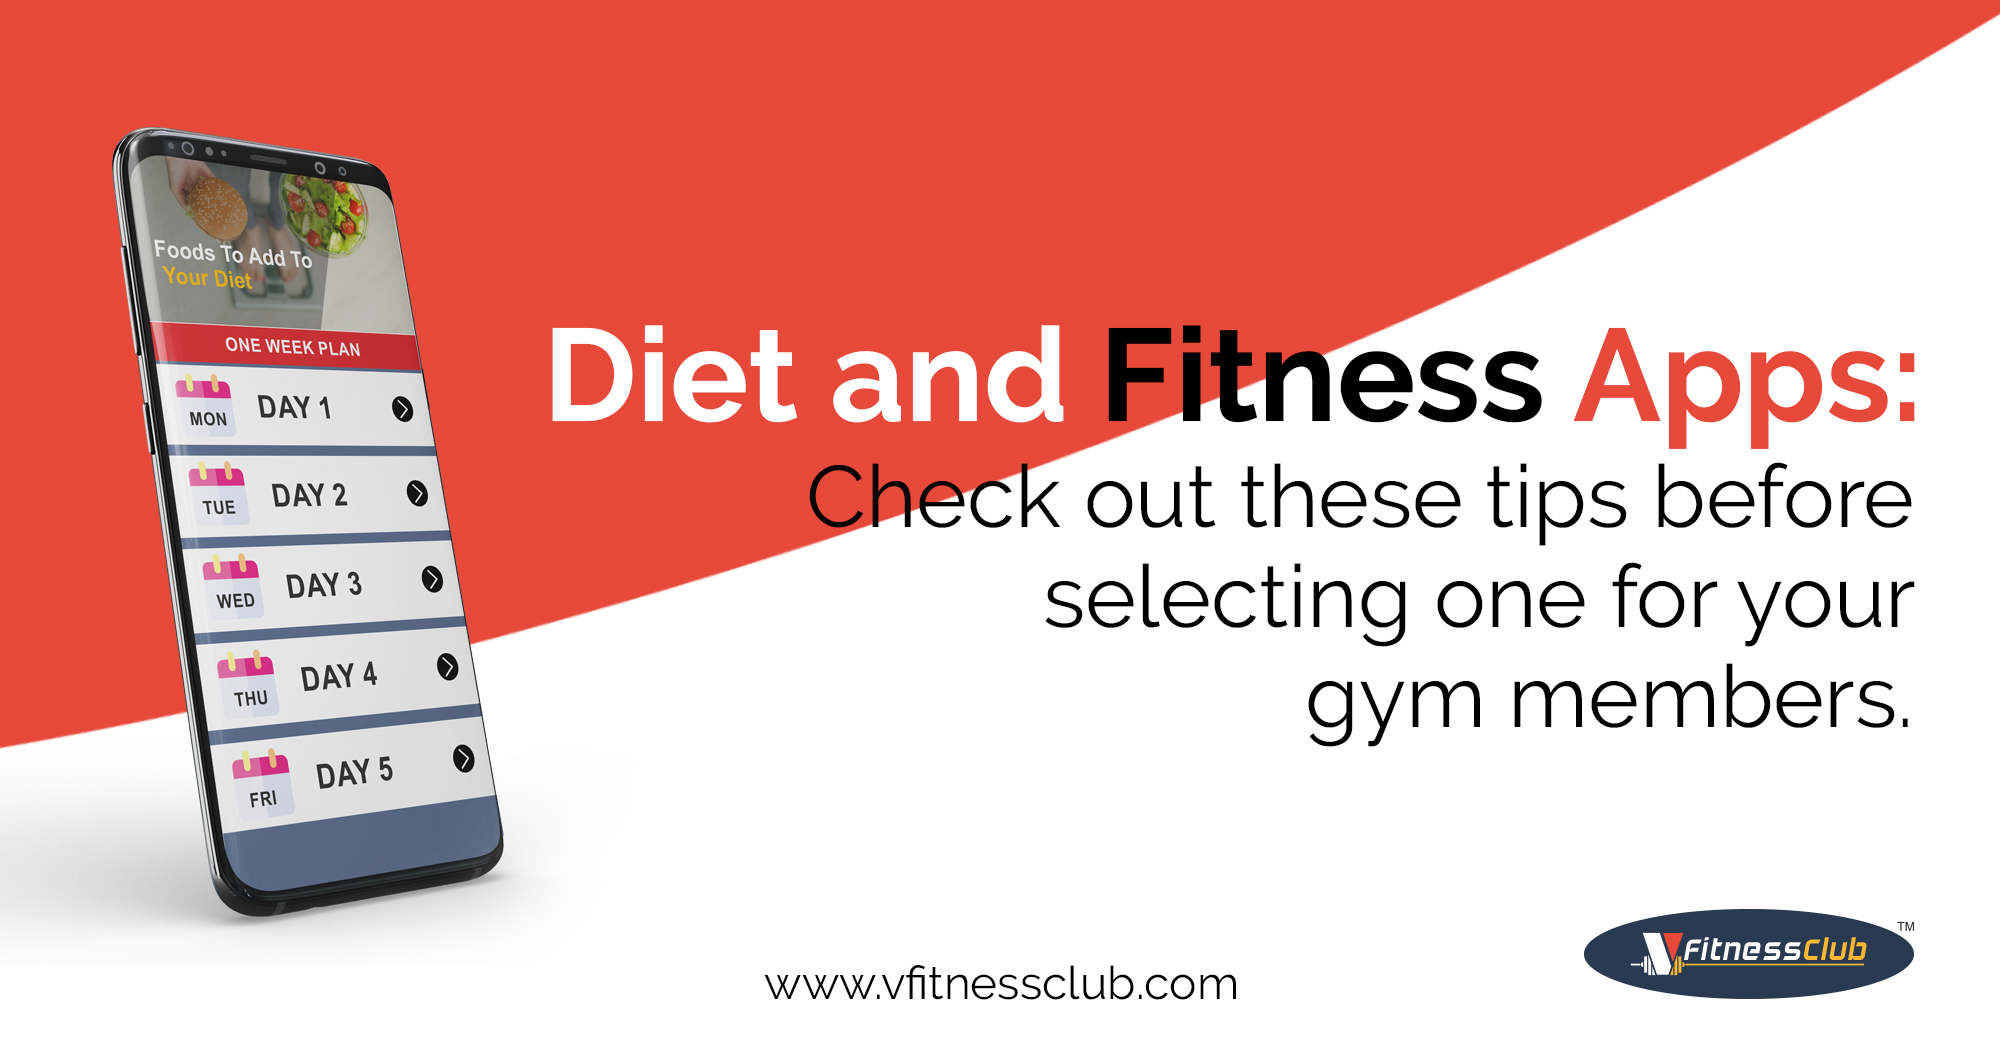 Diet And Fitness Apps: Check Out These Tips Before Selecting One For Your Gym Members